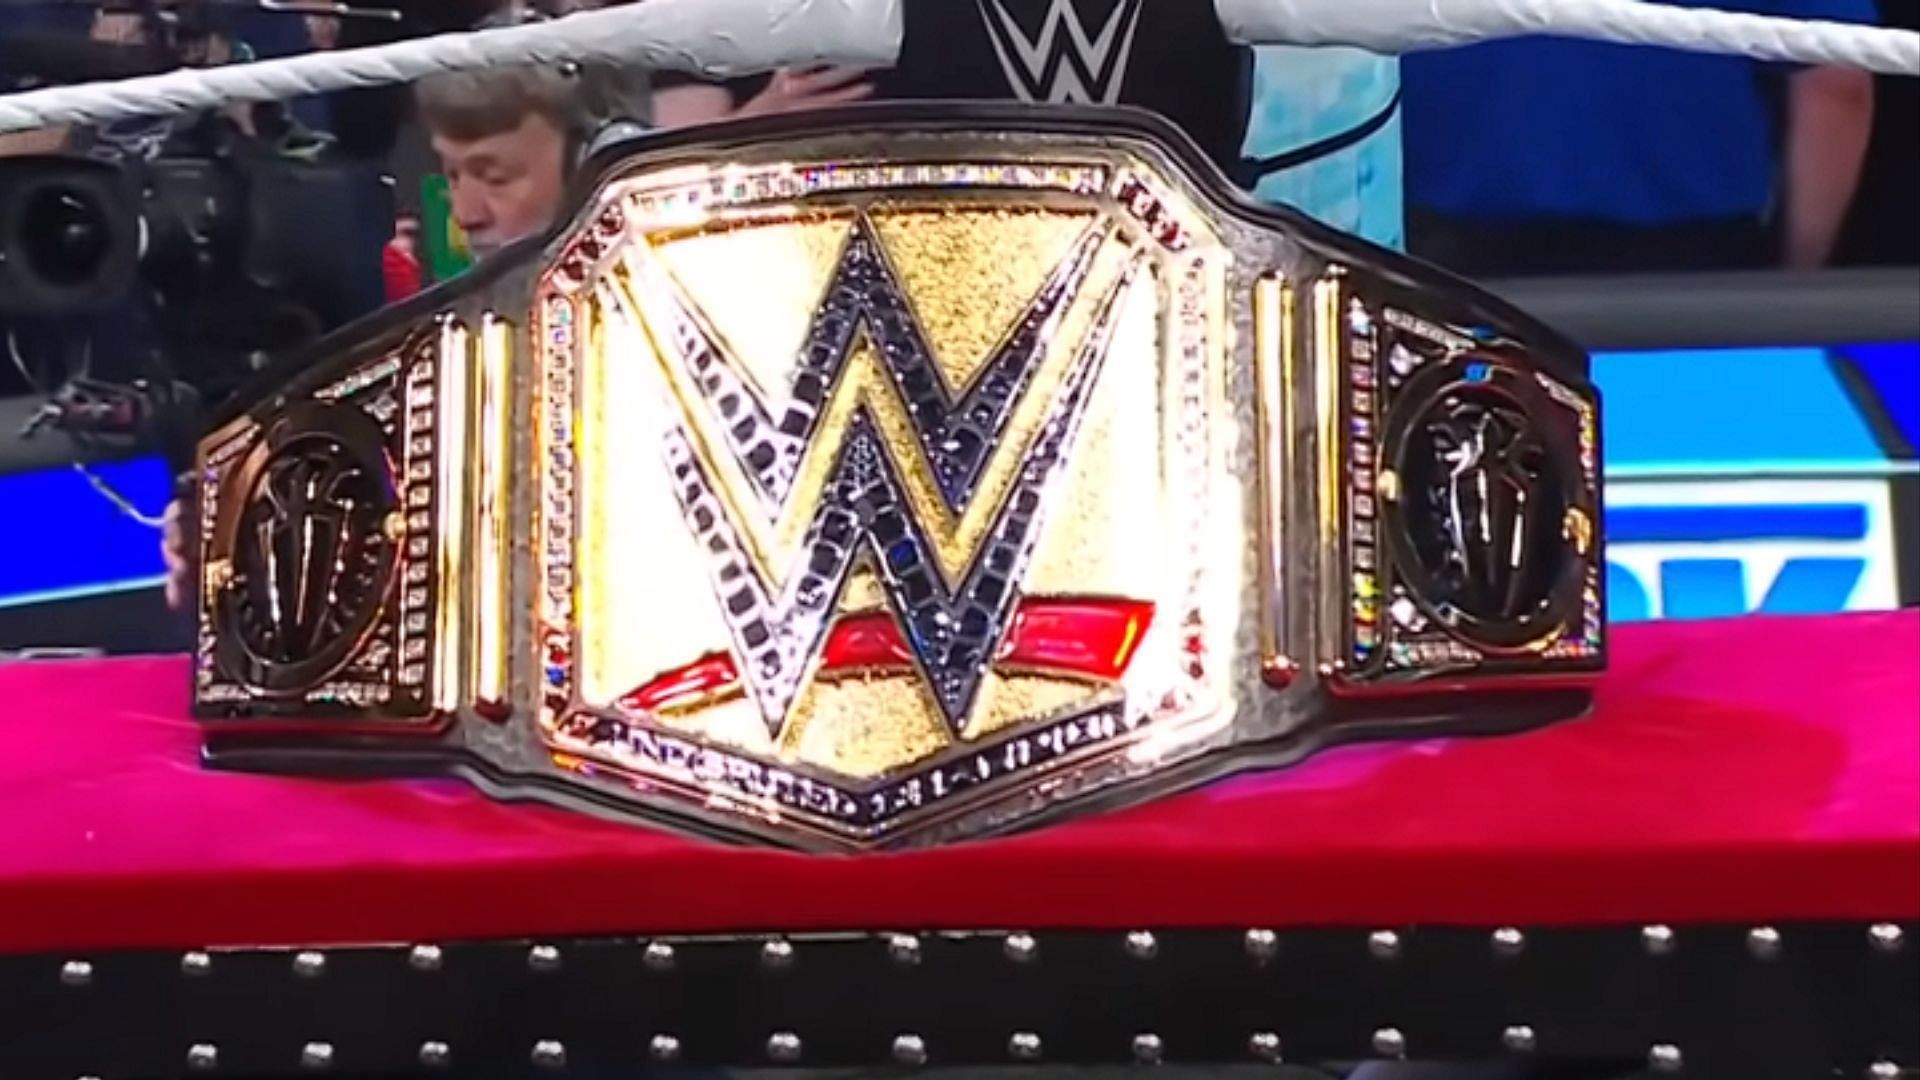 The WWE Championship is one of the top prizes in the promotion [Photo courtesy of AEW